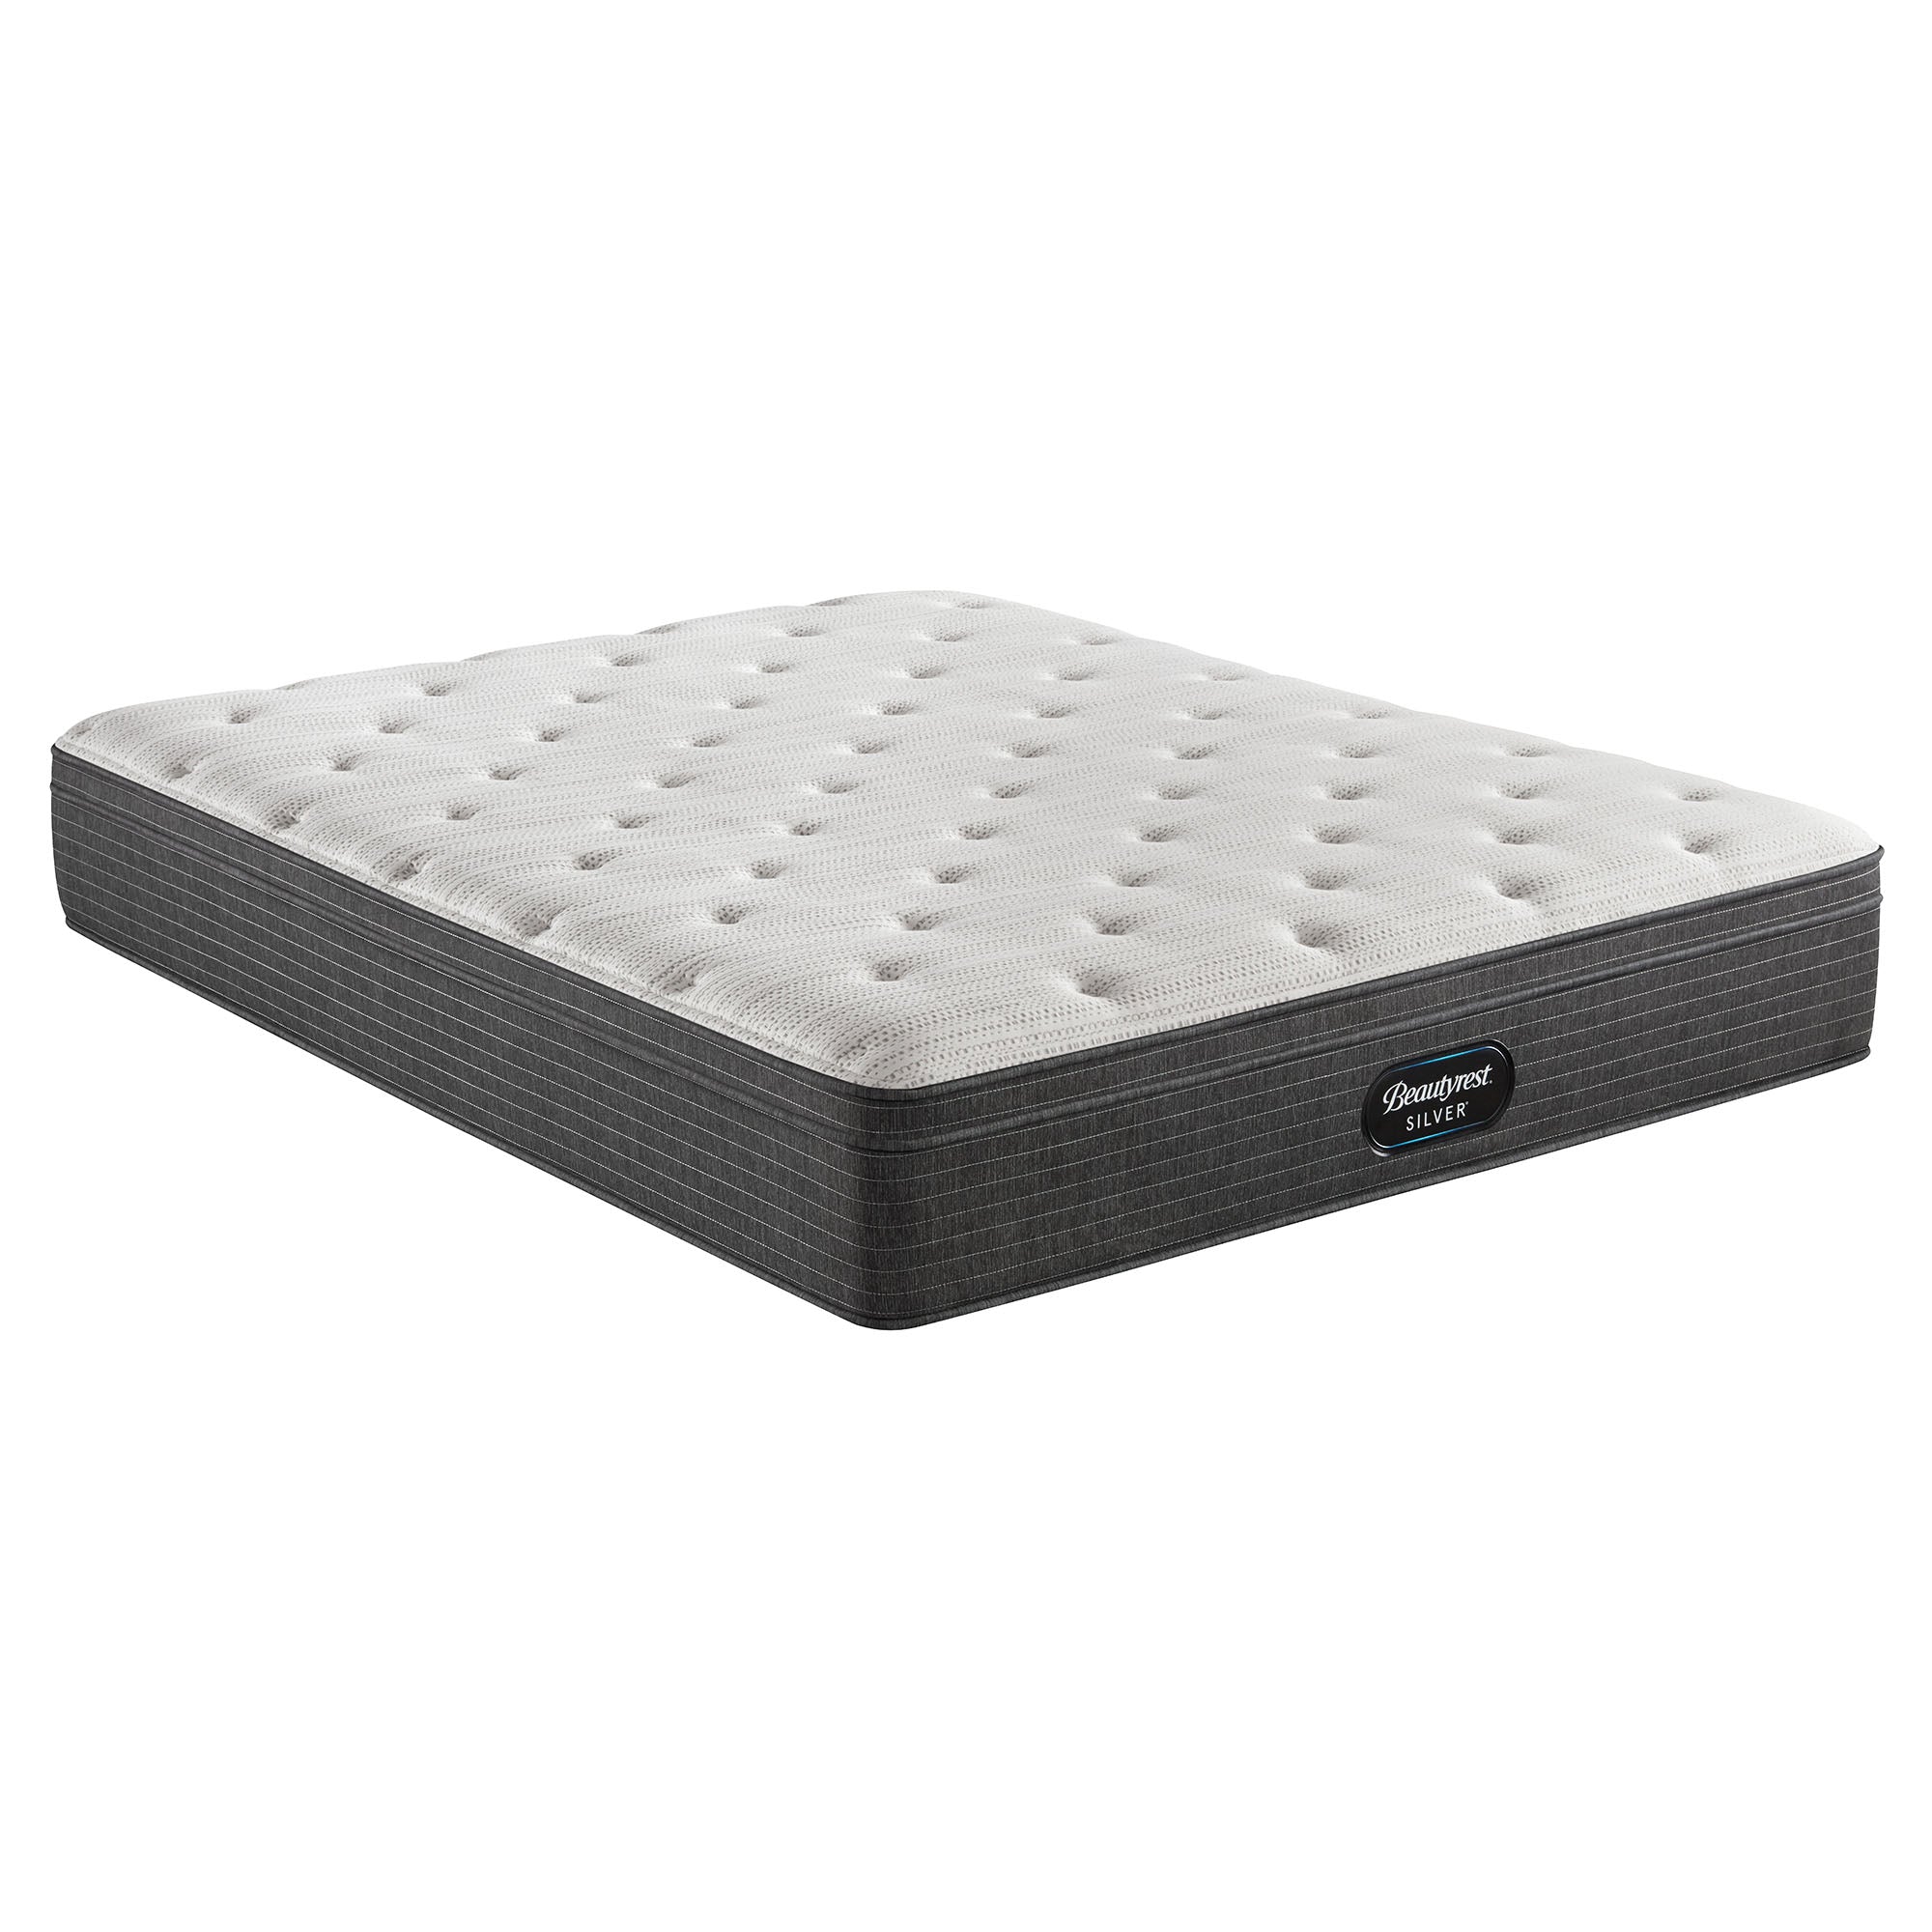 The Beautyrest Silver BRS900 Plush Euro Top mattress alone on a white background